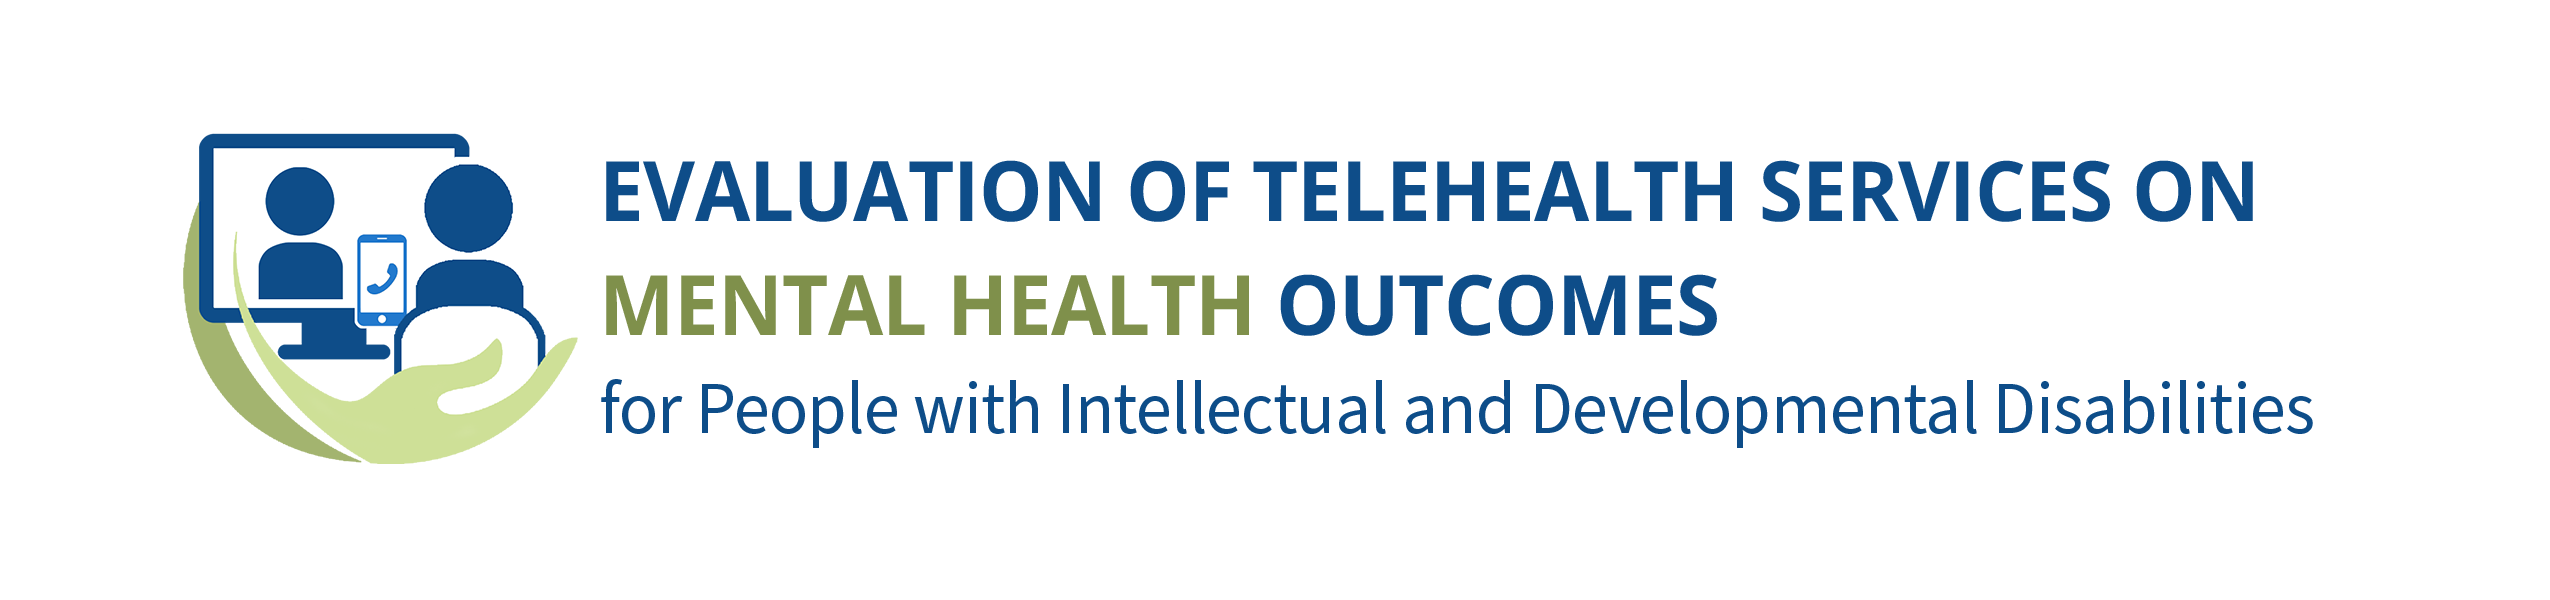 Evaluation of Telehealth Services on Mental Health Outcomes for People With Intellectual and Developmental Disabilities